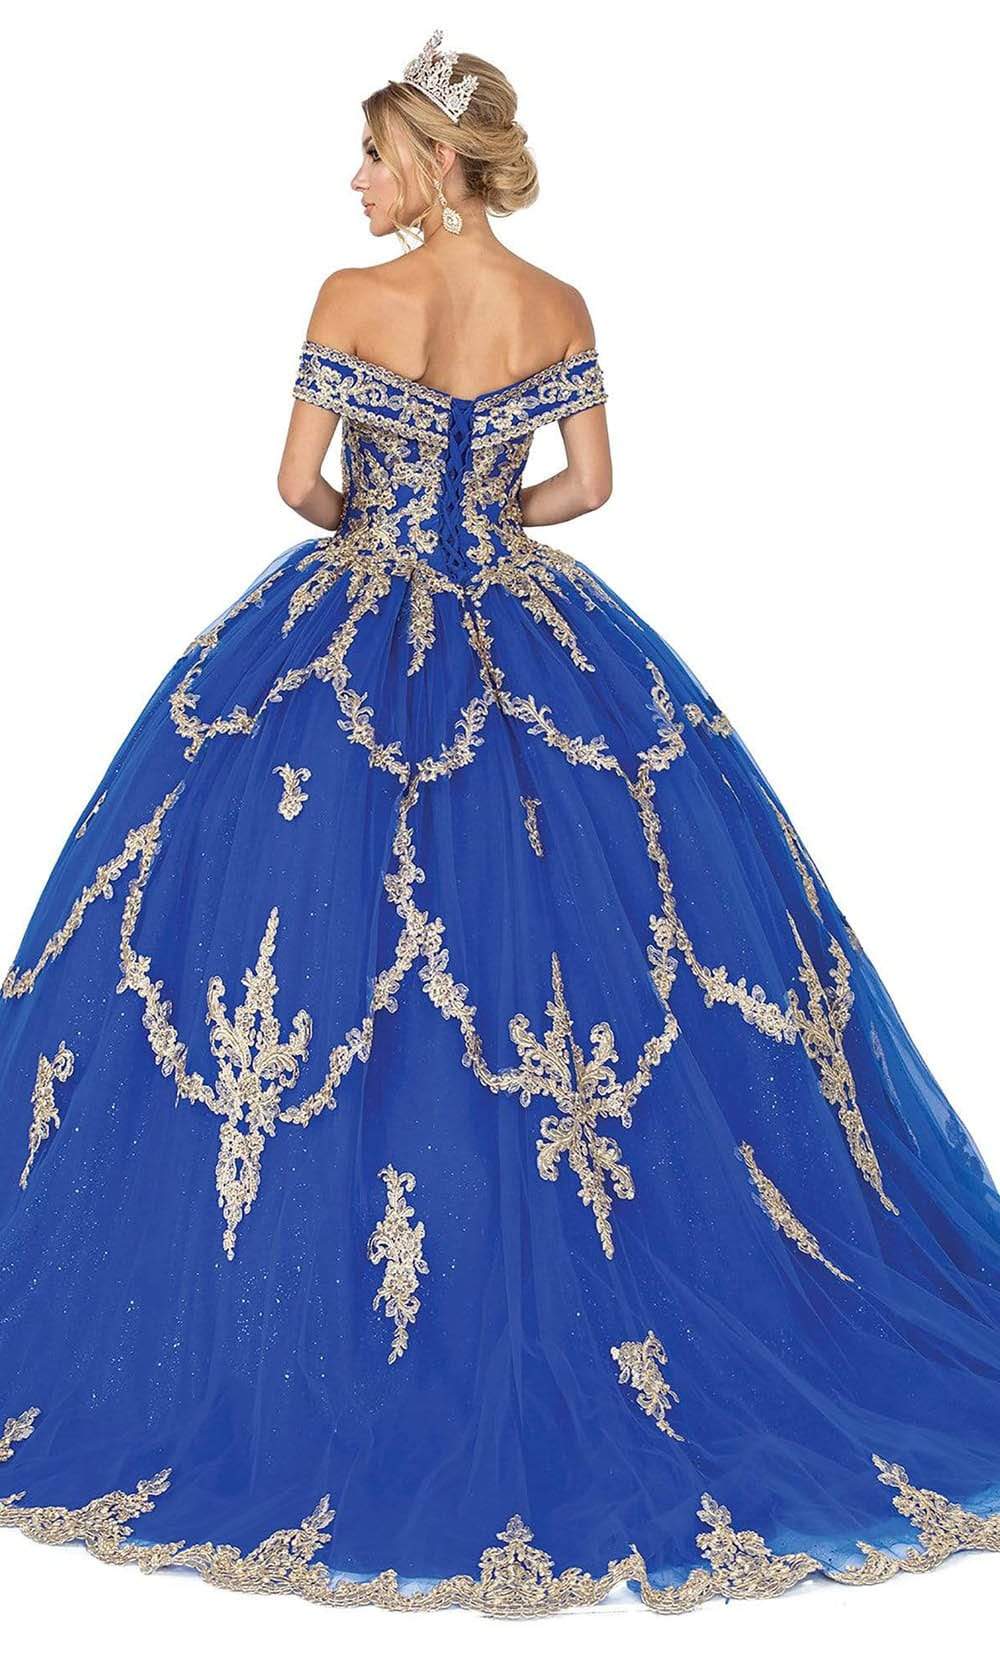 Dancing Queen - 1572 Embroidered Off Shoulder Ballgown Special Occasion Dress